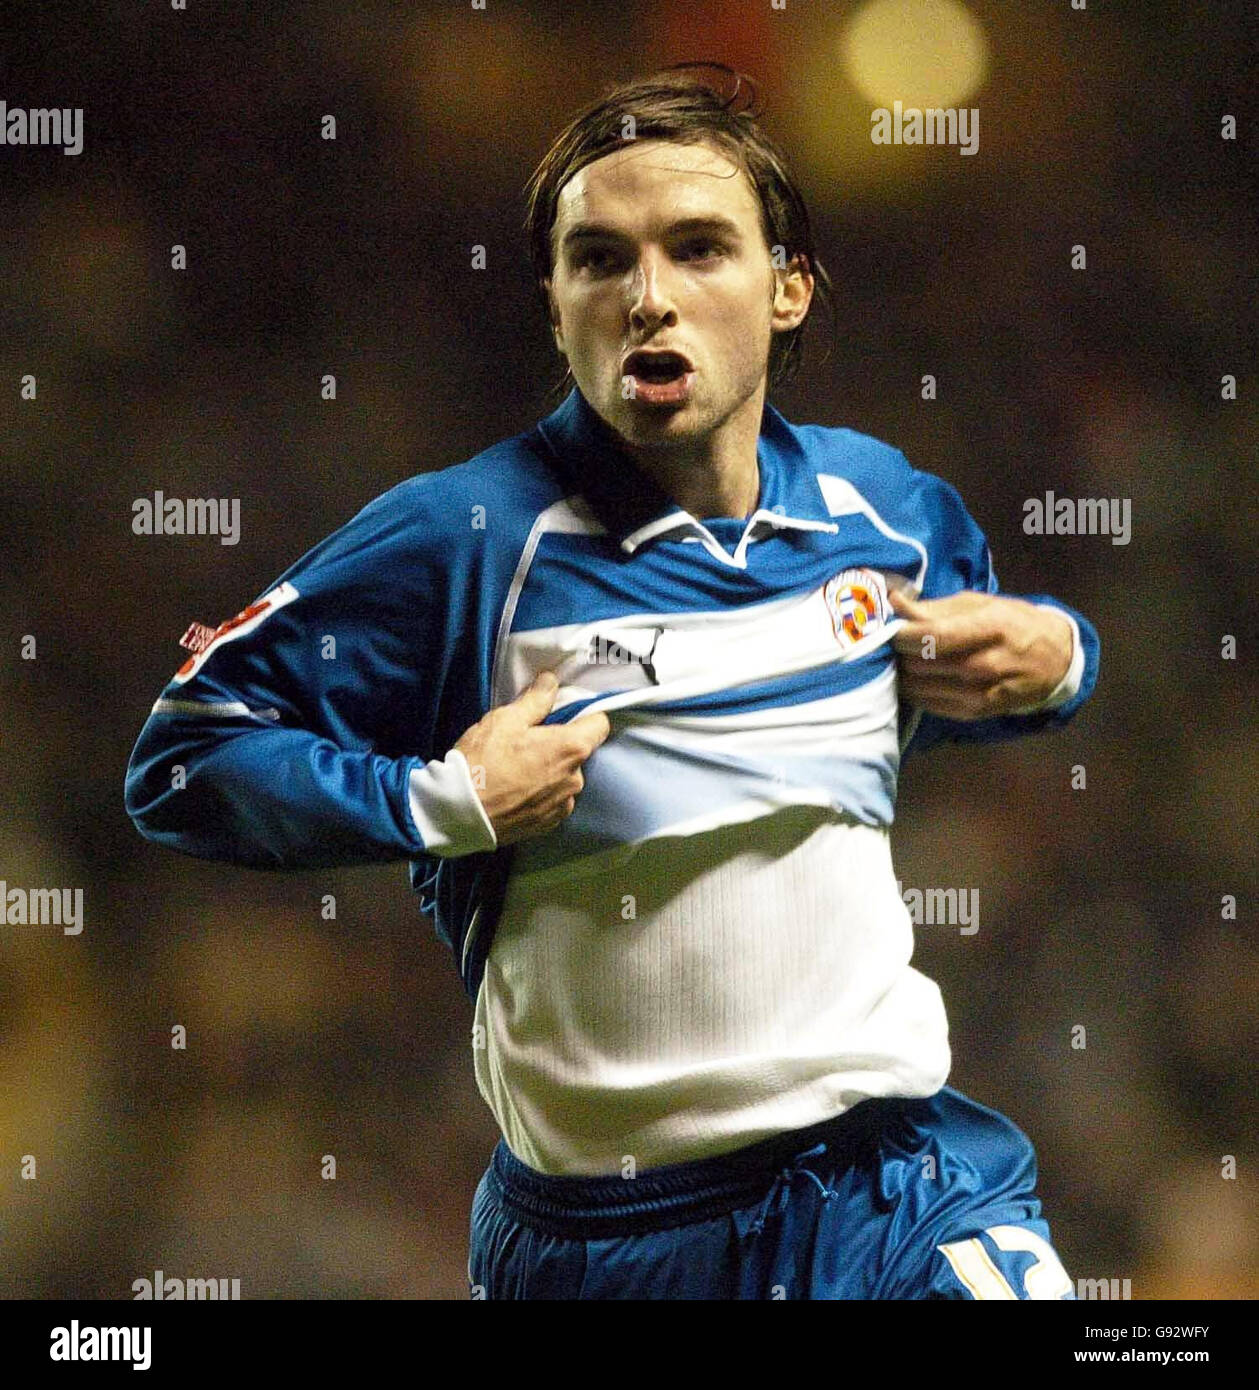 Reading's Bobby Convey celebrates after scoring during the Coca-Cola Championship match against Wolverhampton Wanderers at Molineux, Wolverhampton, Monday December 26, 2005. PRESS ASSOCIATION Photo. Photo credit should read: PA NO UNOFFICIAL CLUB WEBSITE USE. Stock Photo